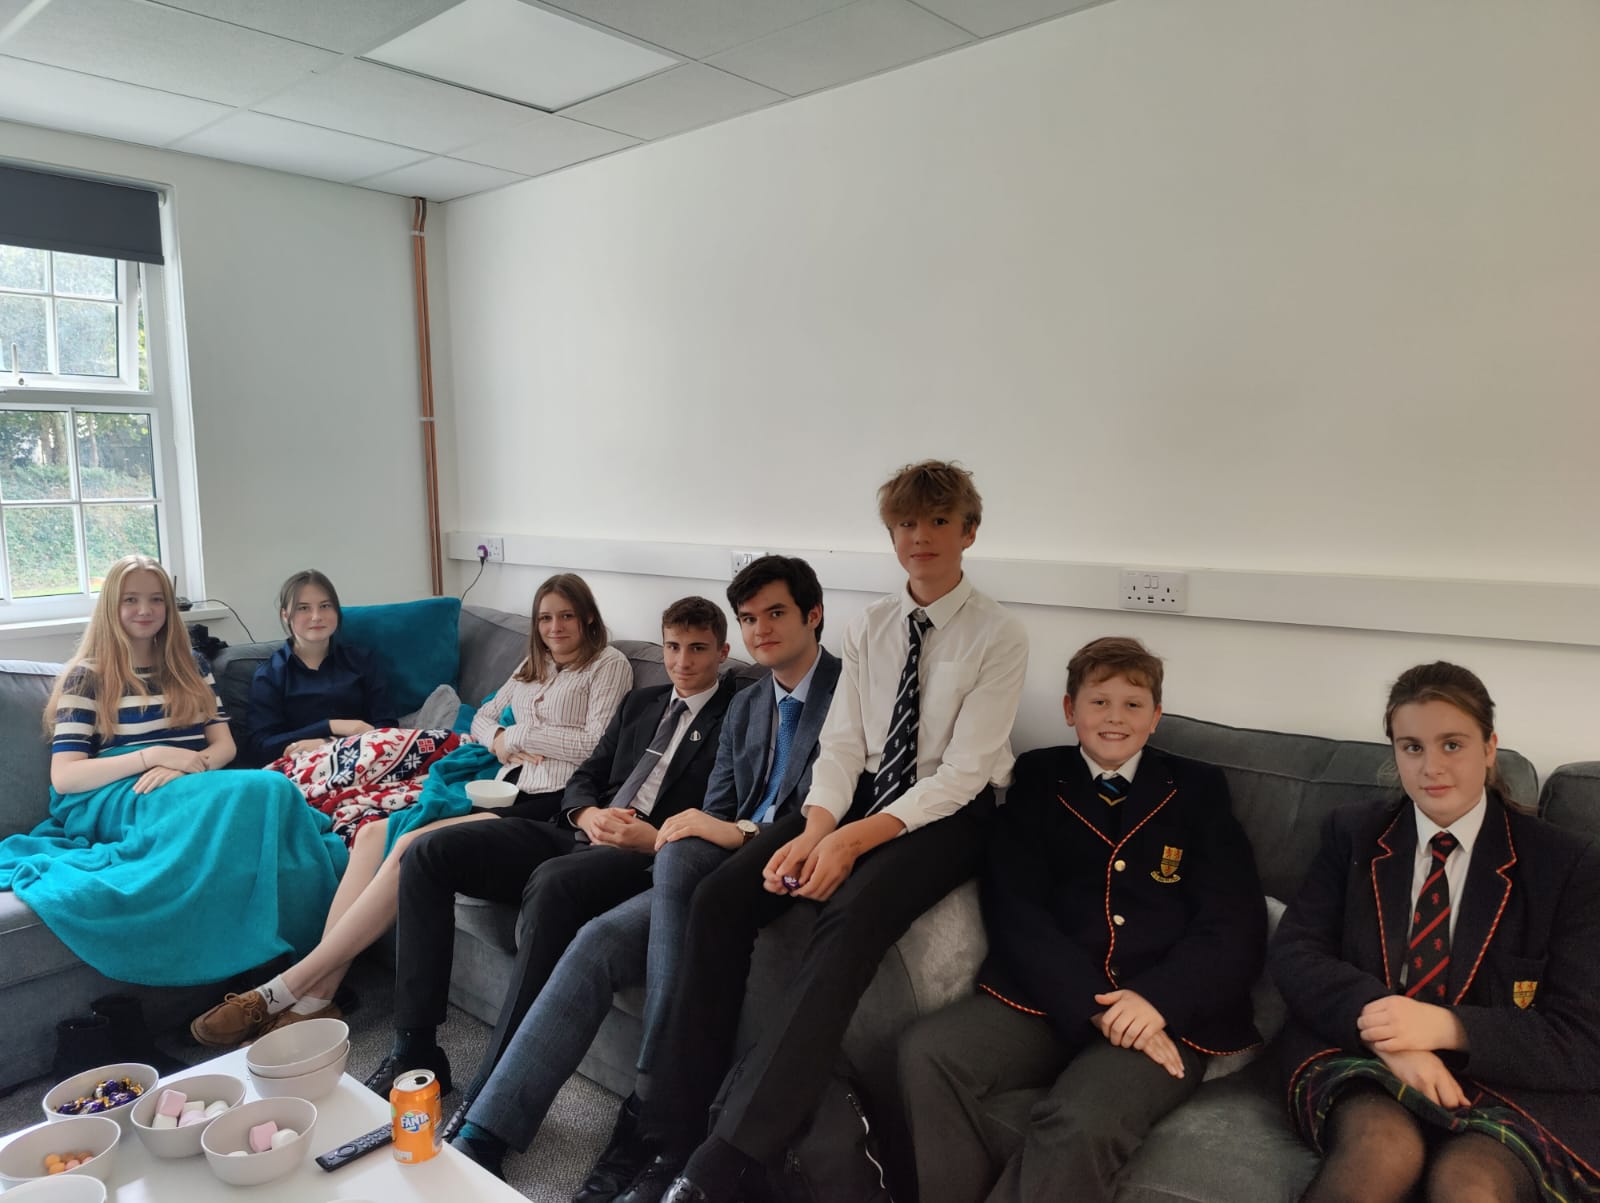 Academic Scholars learn 'the maths of board games'